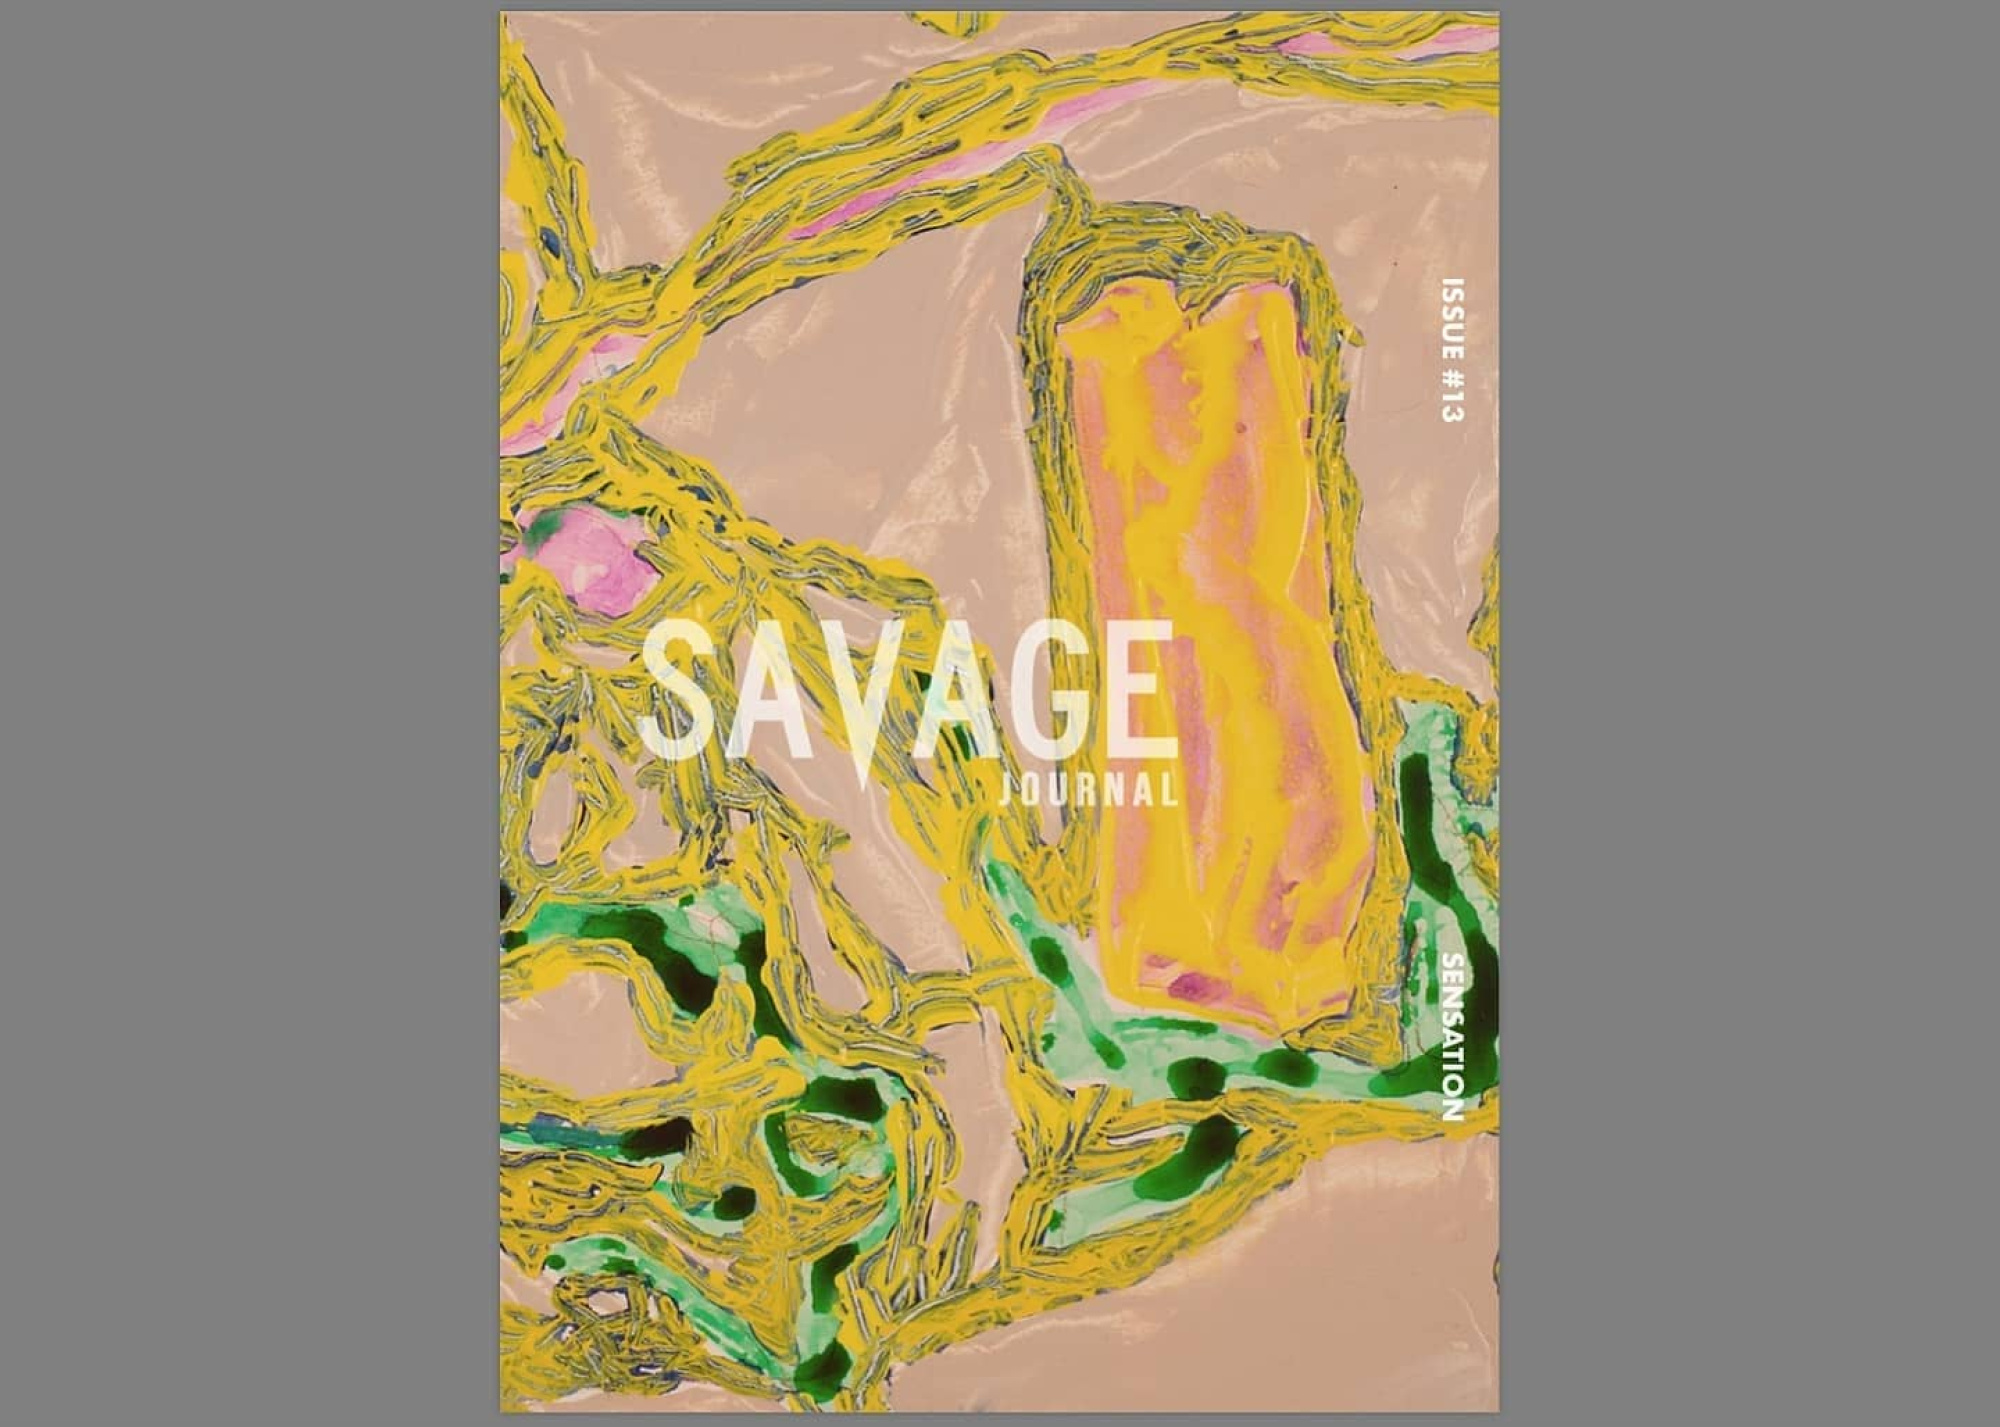 SAVAGE Journal Issue 13, image Sing to Me by Joy C Martindale